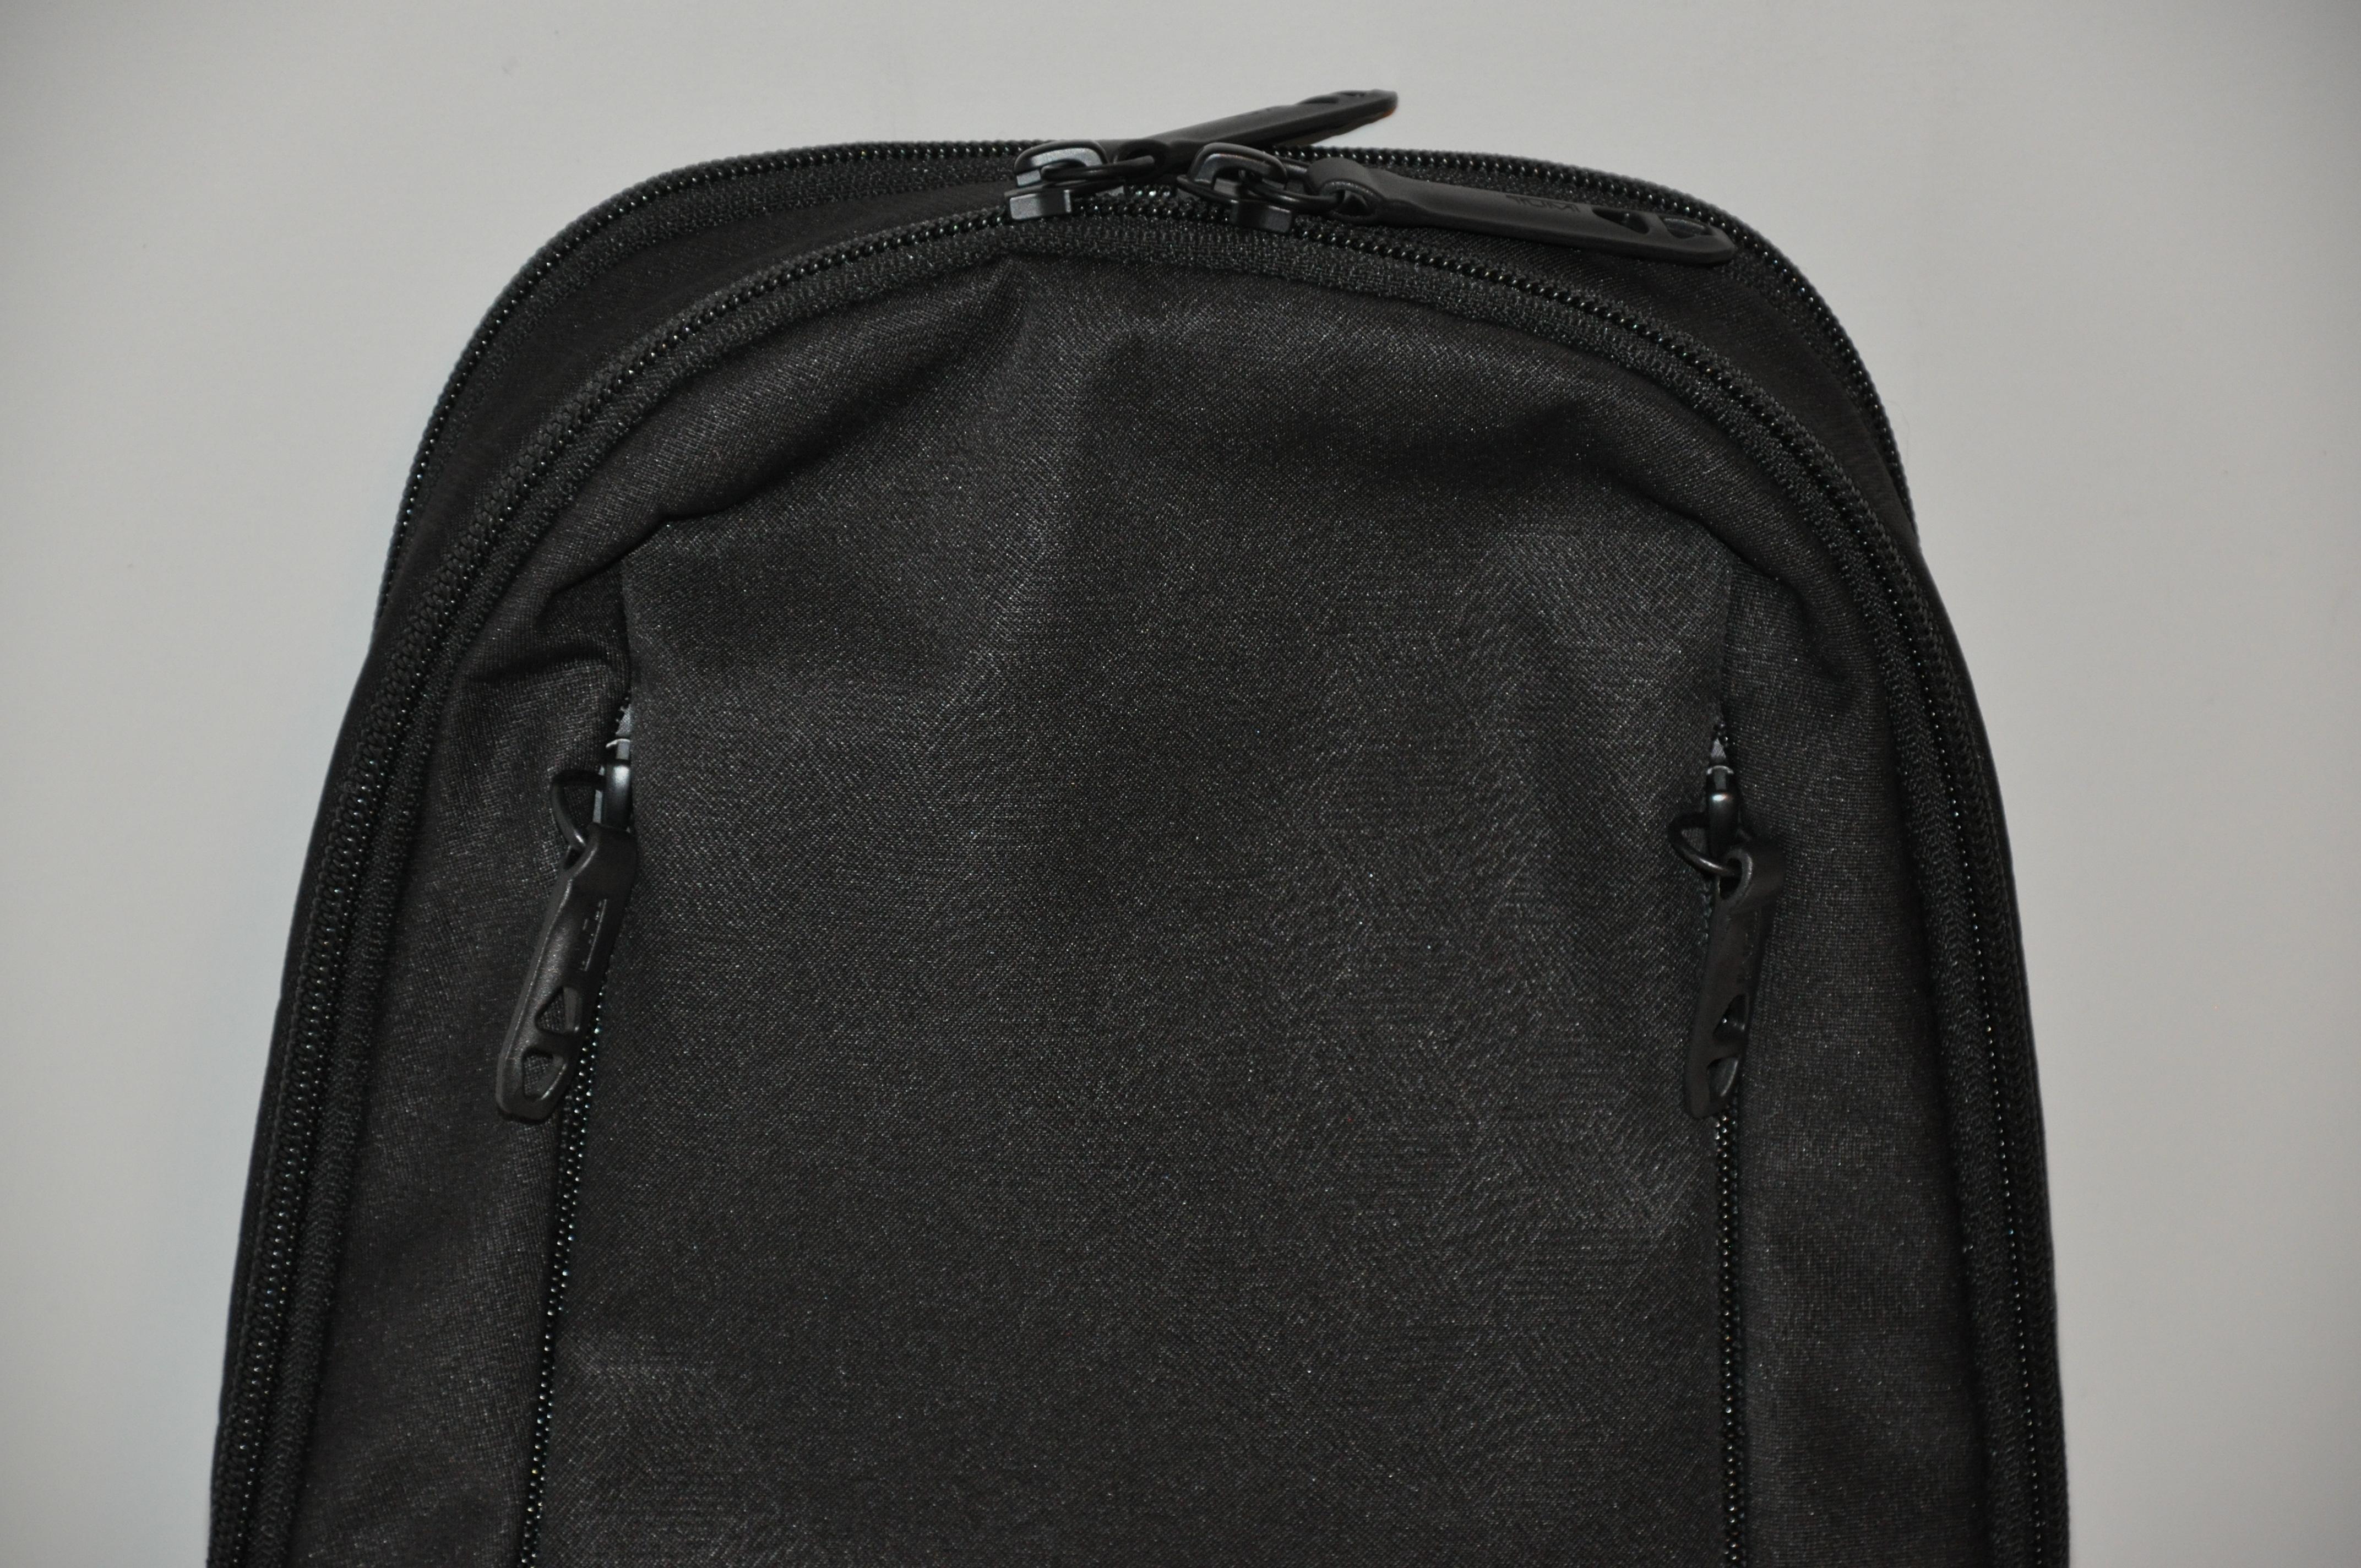 black bag with compartments